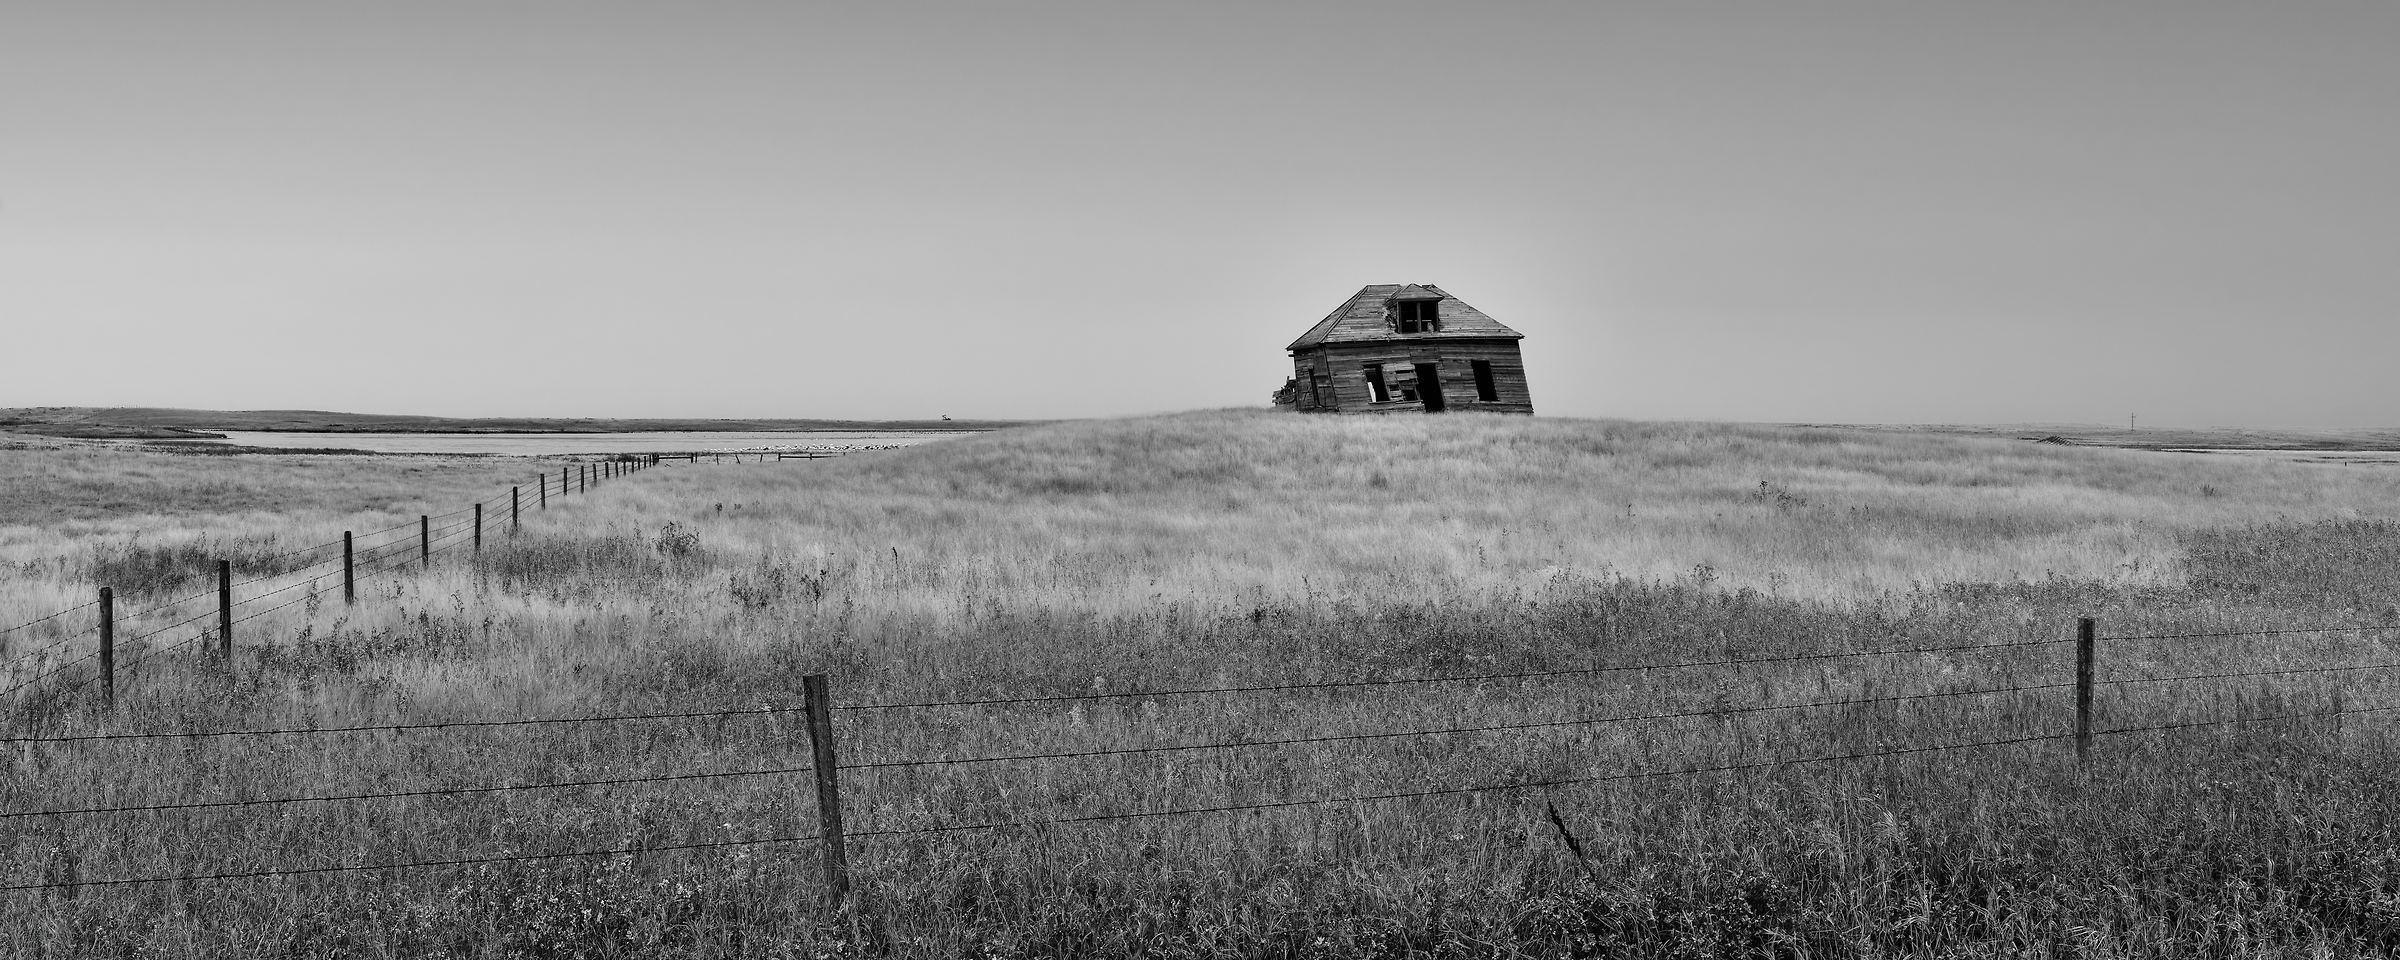 863 megapixels! A very high resolution, large-format VAST photo print of an abandoned house in a prairie; landscape photograph created by Scott Dimond.